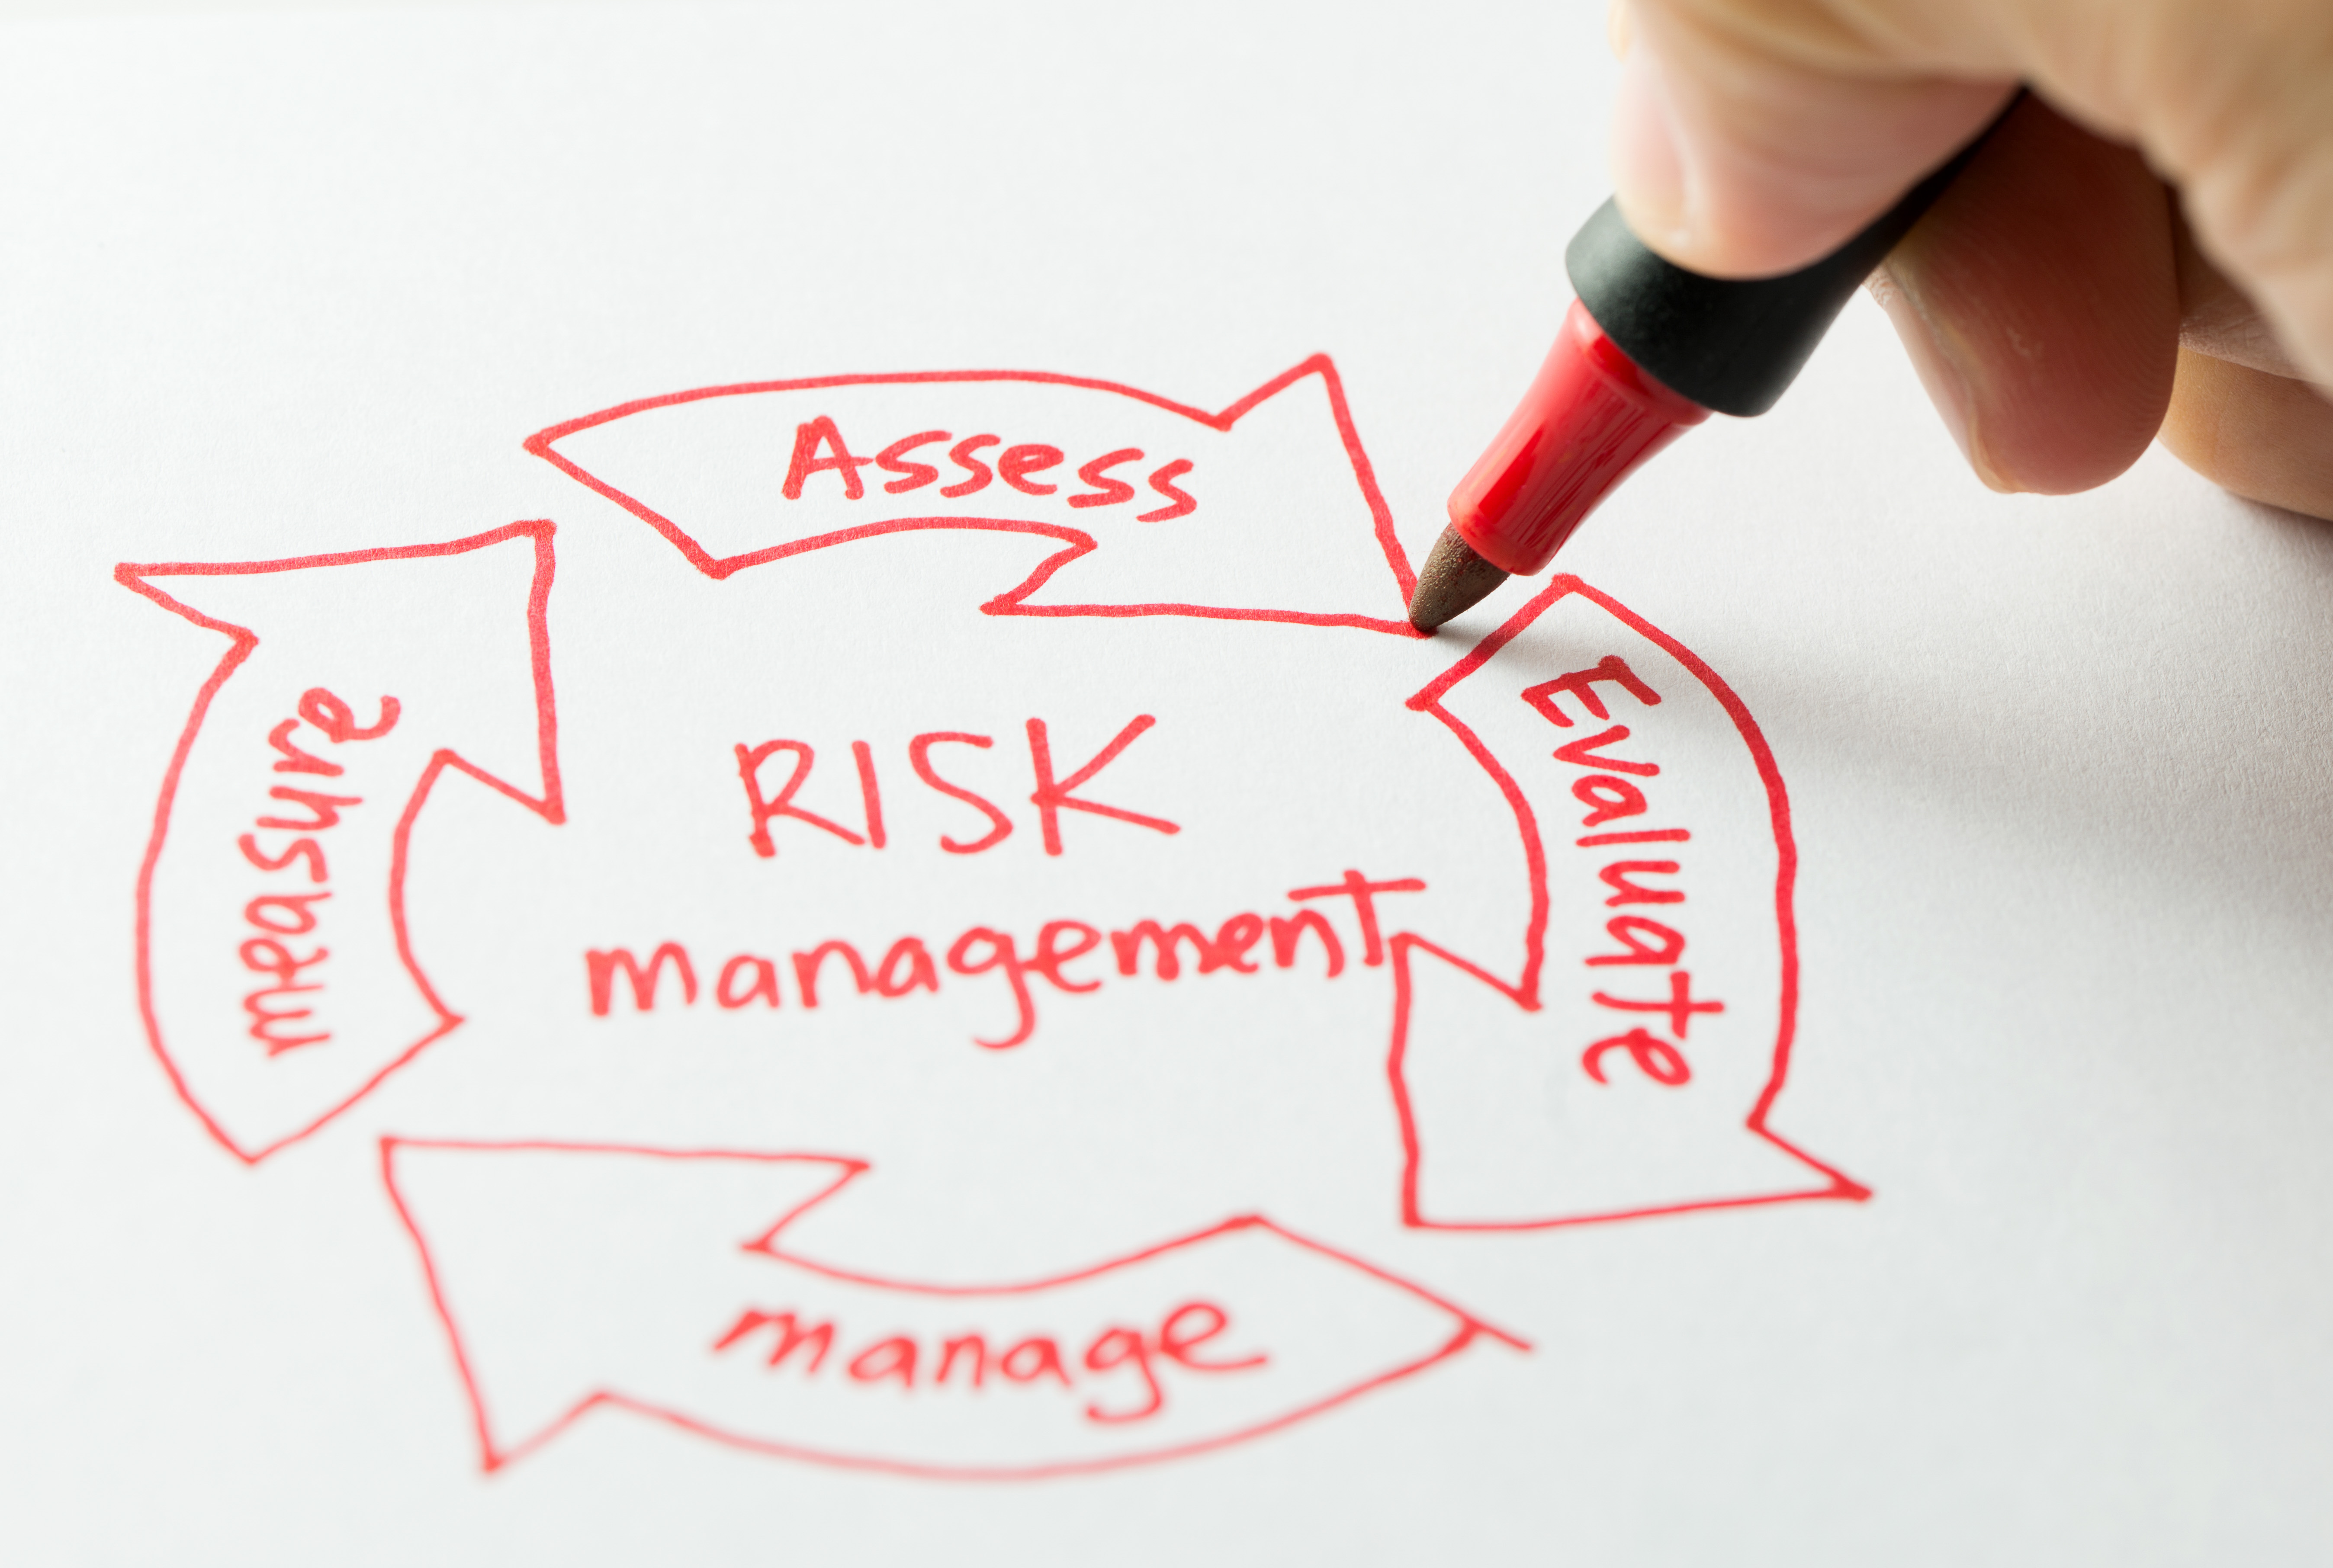 BEST PRACTICES: Supply Chain and Vendor Risk Management